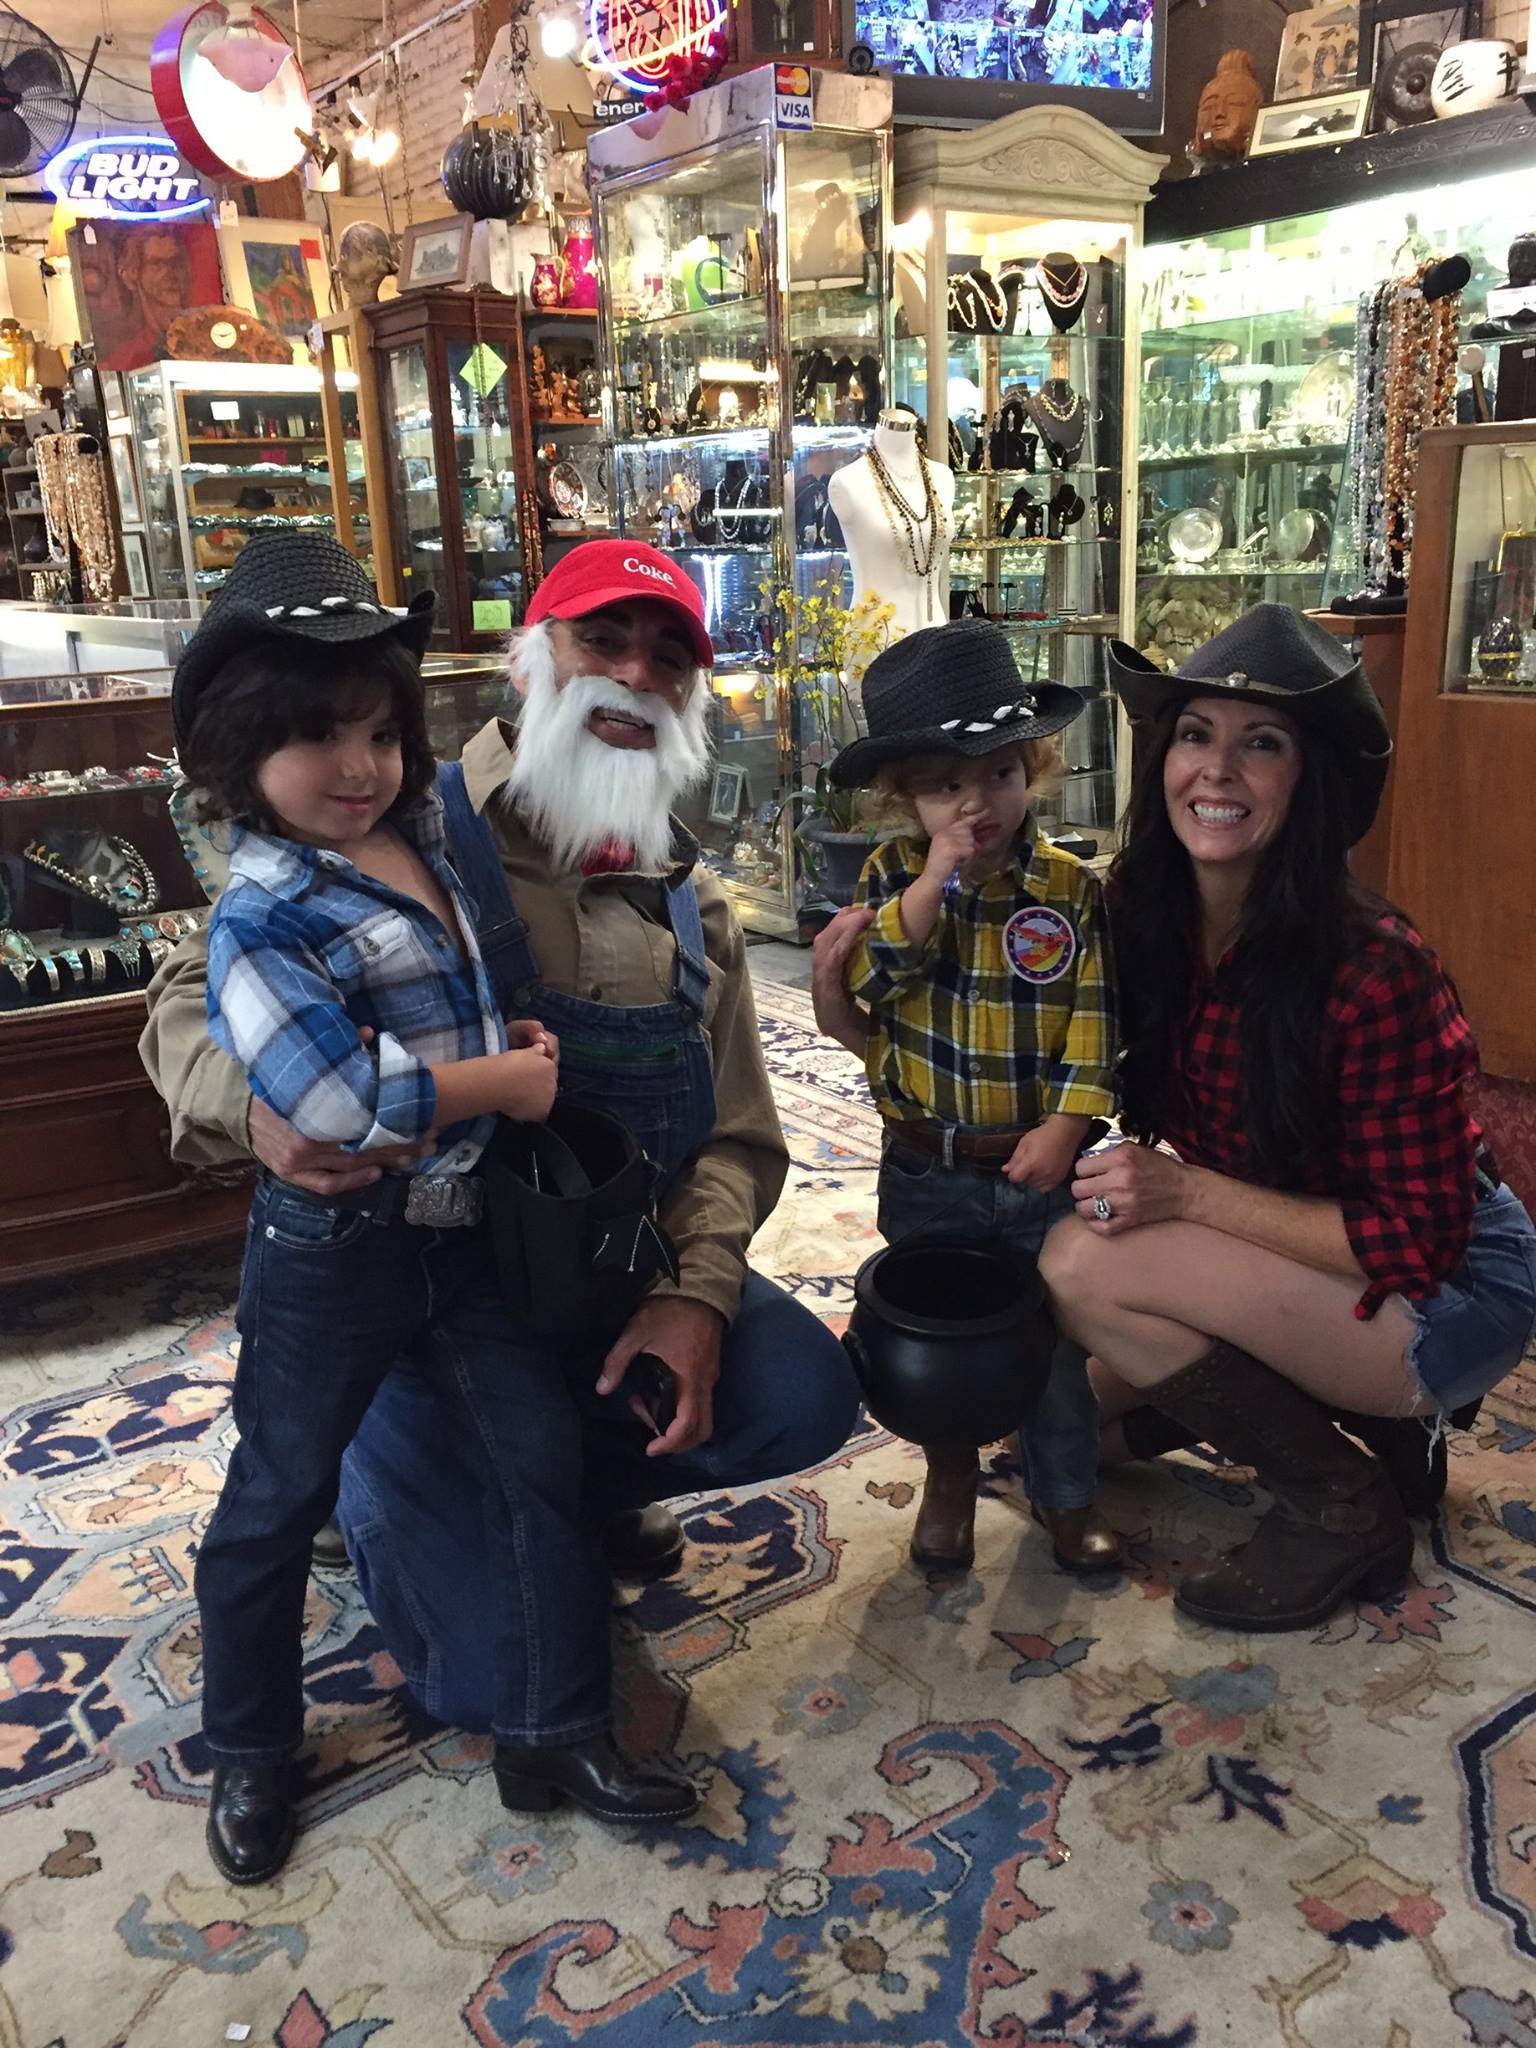 Family of customers dressed up in costume in the store